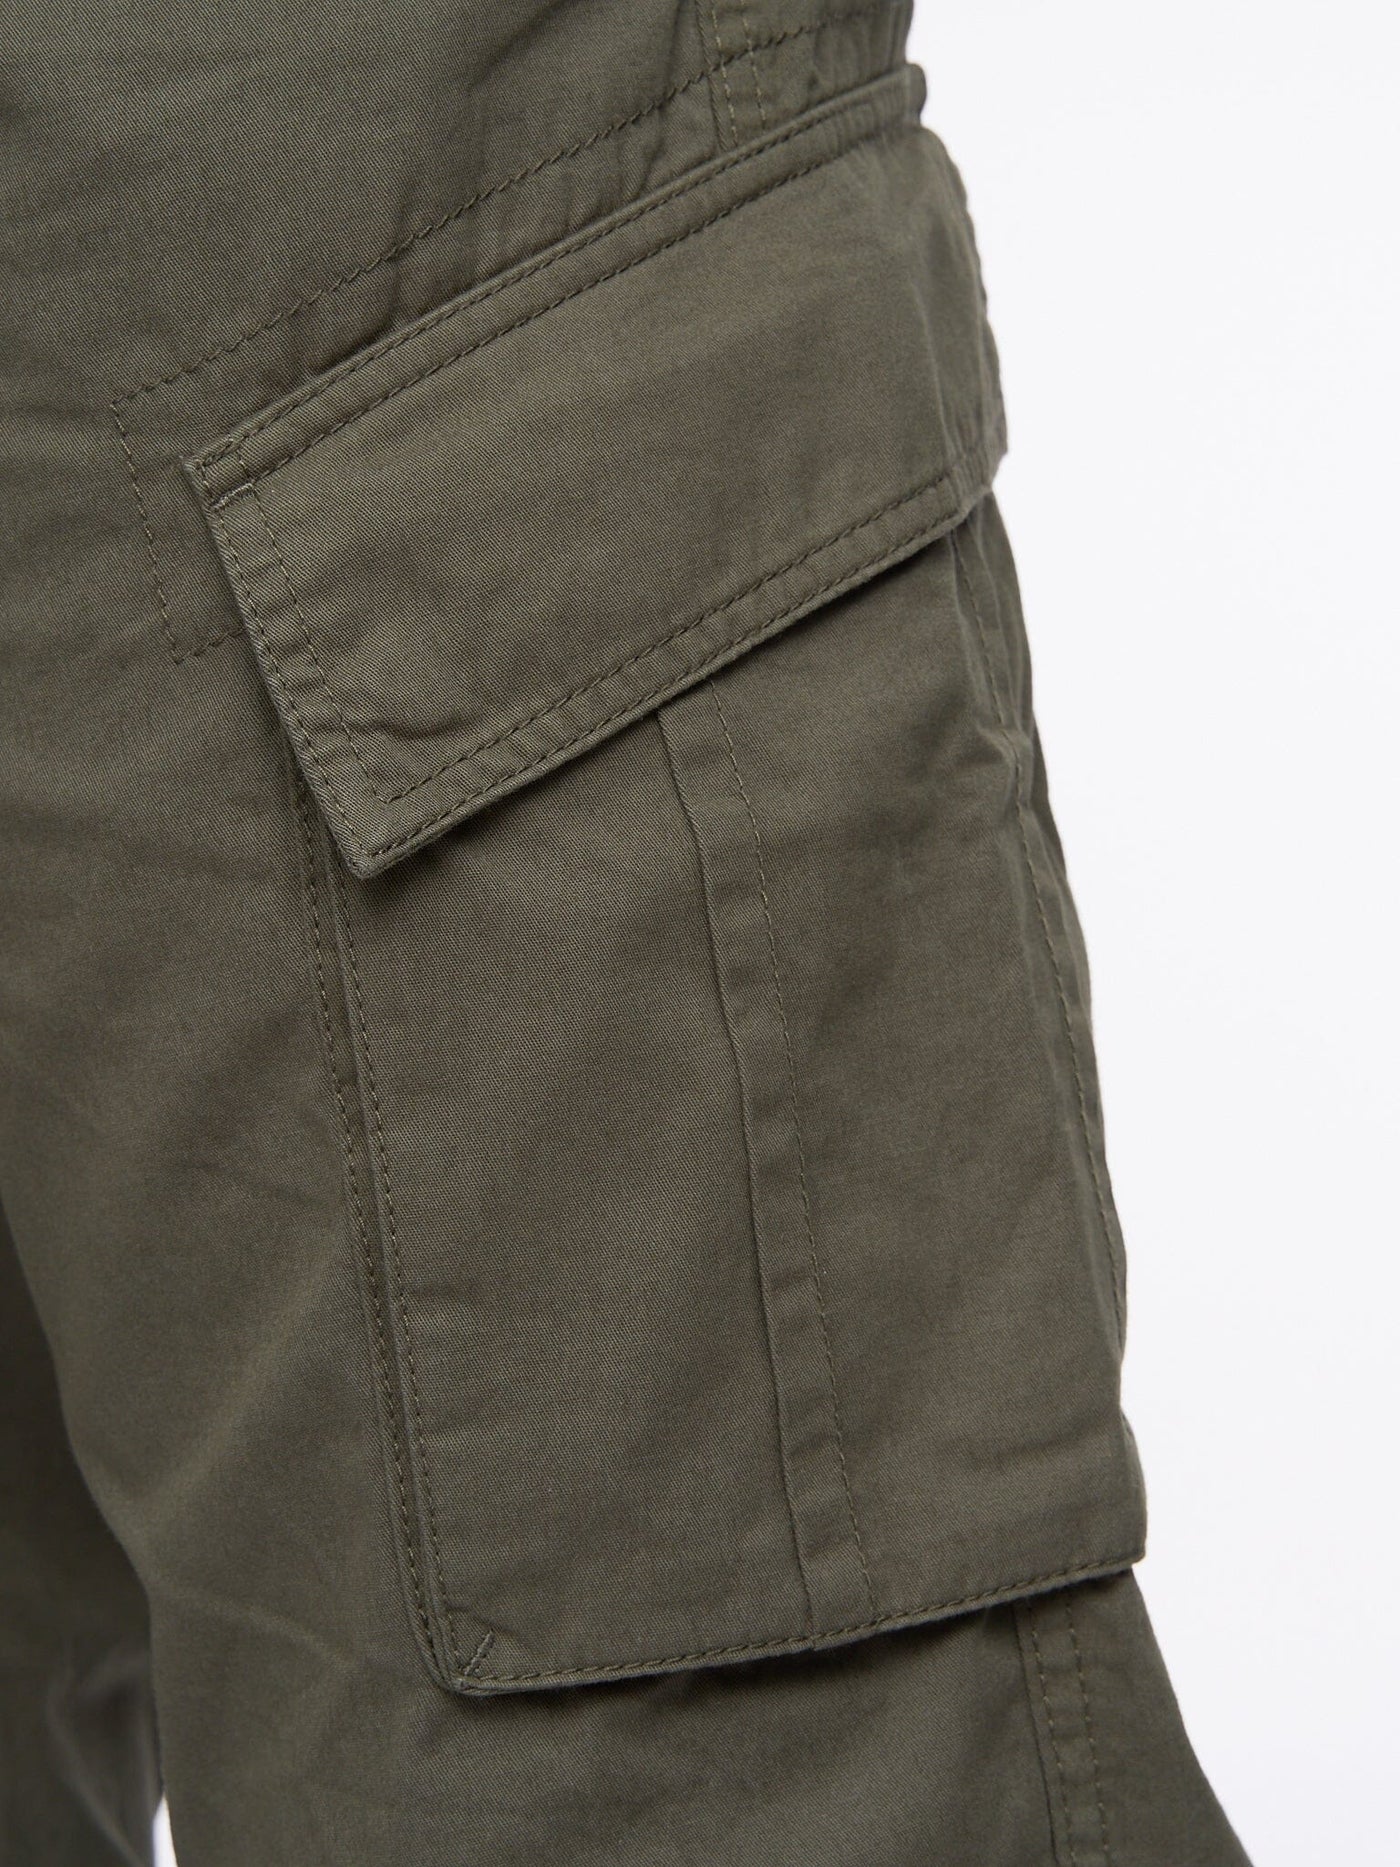 Sidemoore Cargo Pants Olive